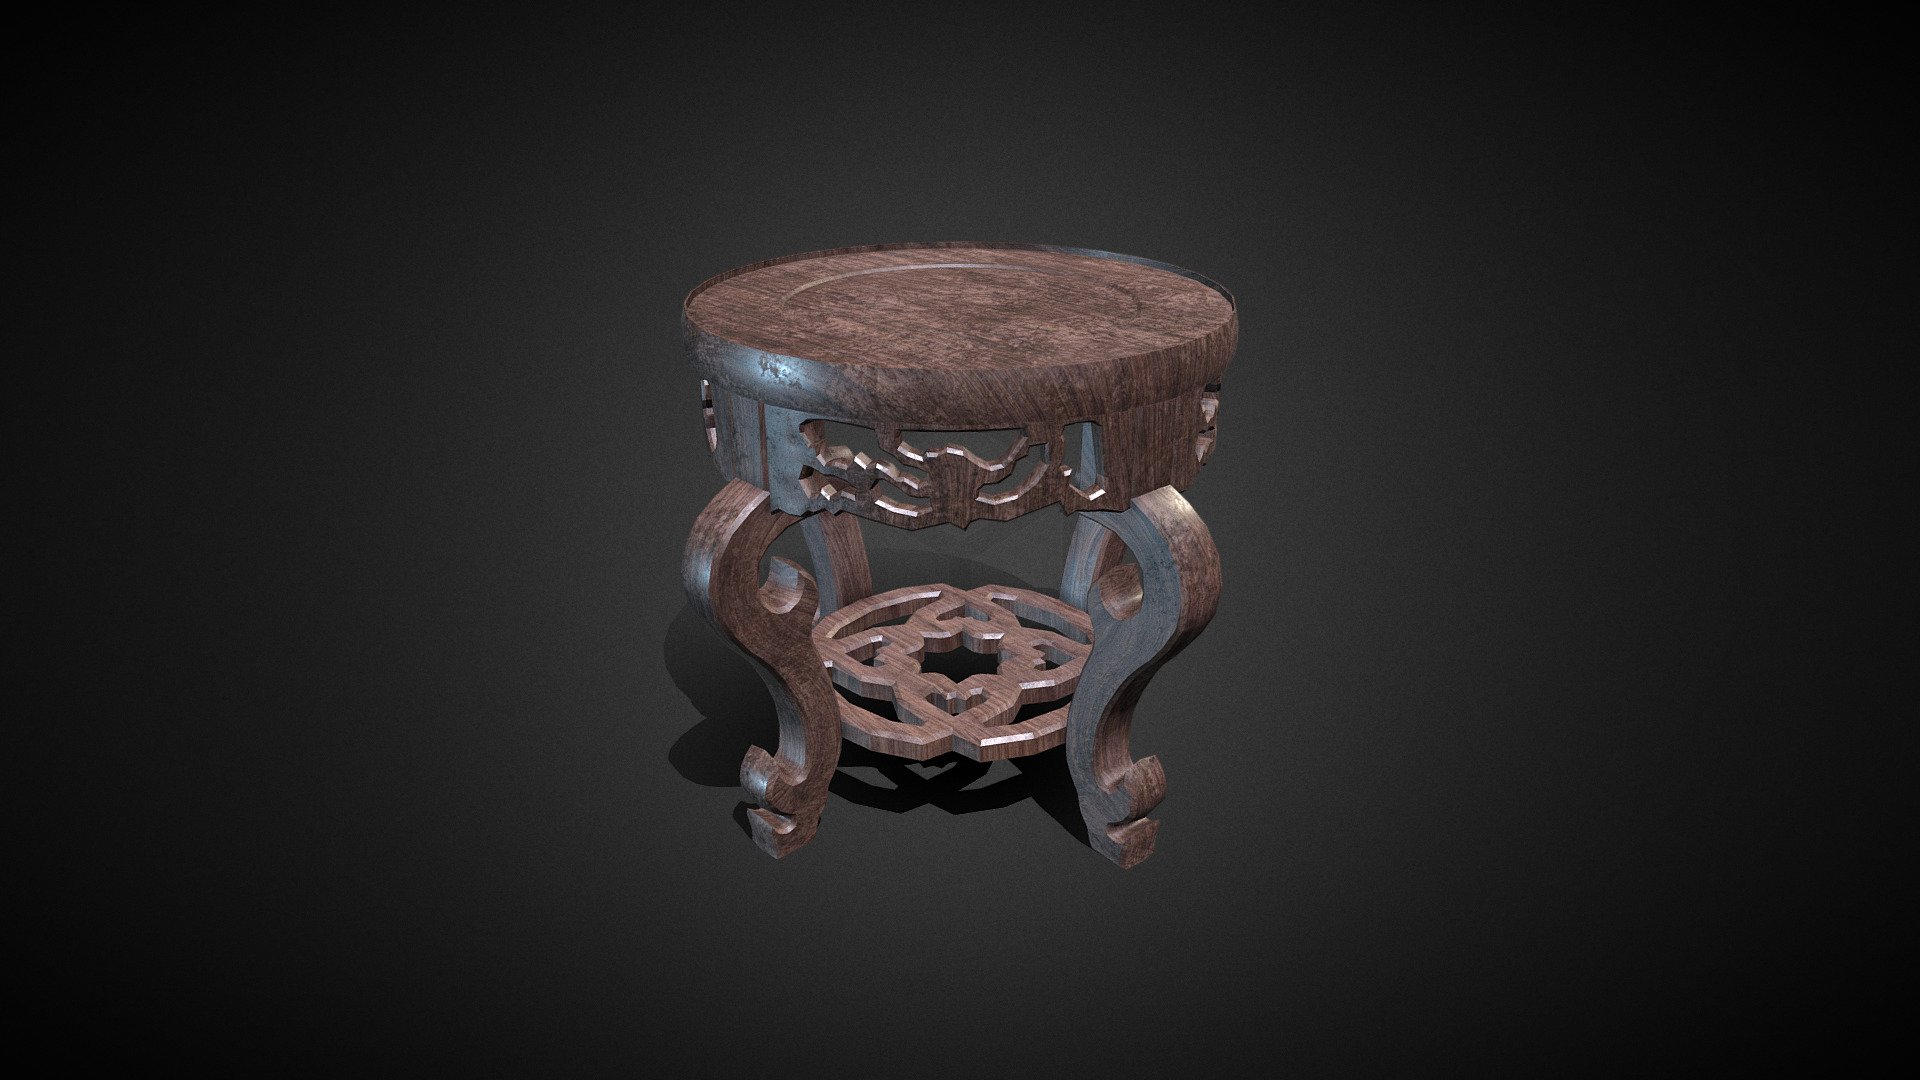 Ancient Chinese Table get design from Referance Images from Google Search.
Its my personal Project 3d model